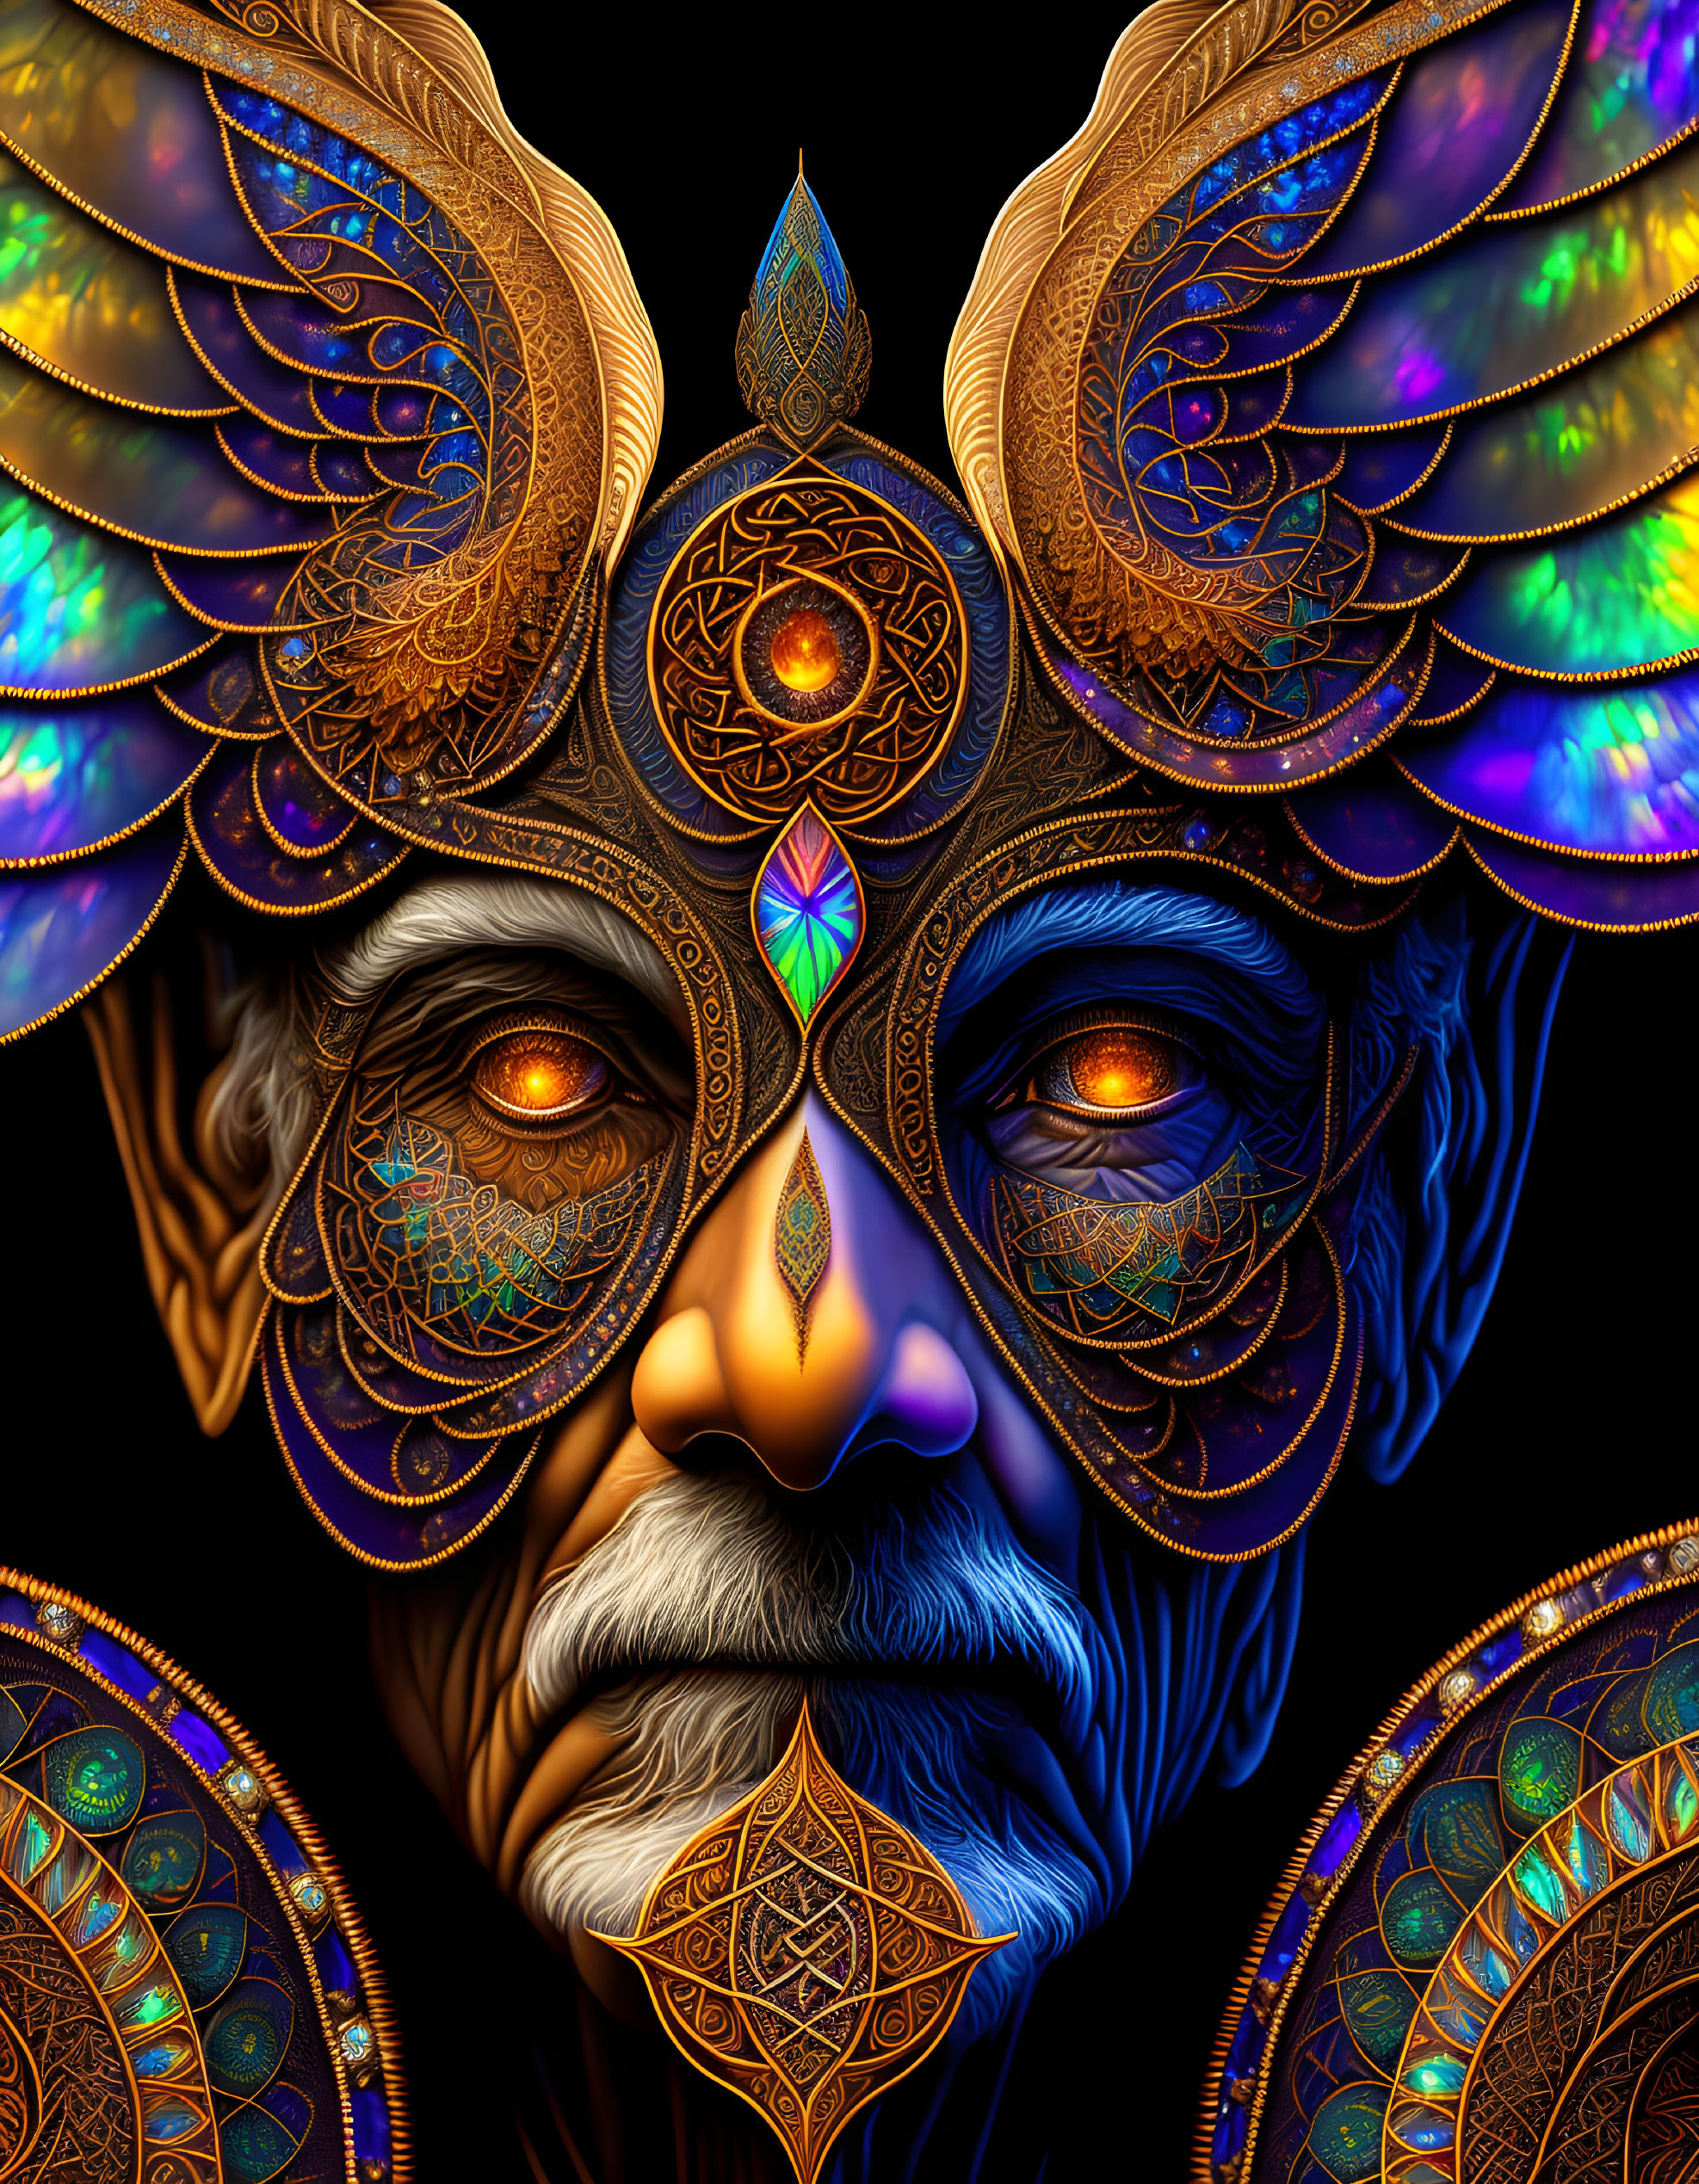 Detailed digital artwork: Face with glowing orange eyes, golden headpieces, and mandala patterns on black